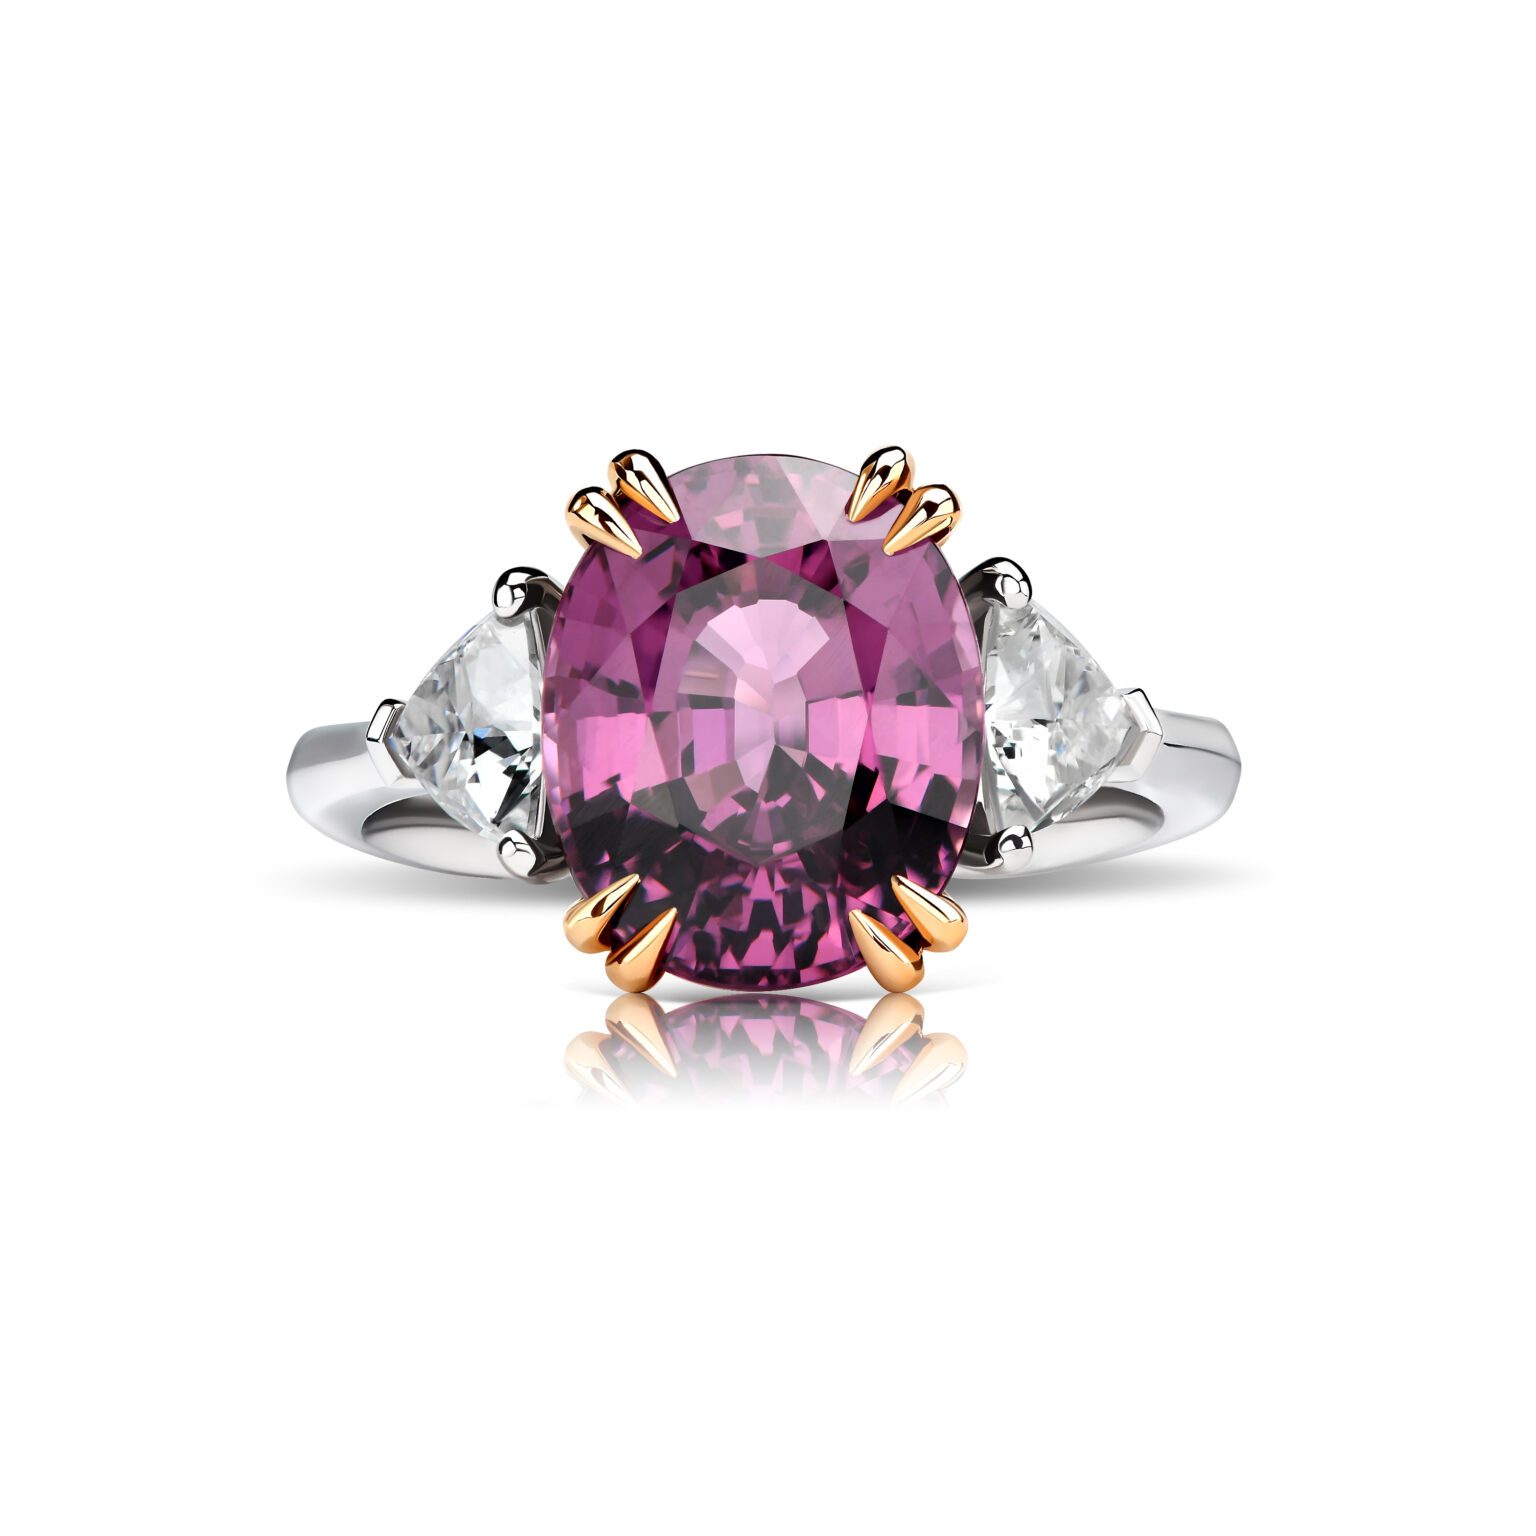 Spinel ring 4.52 ct